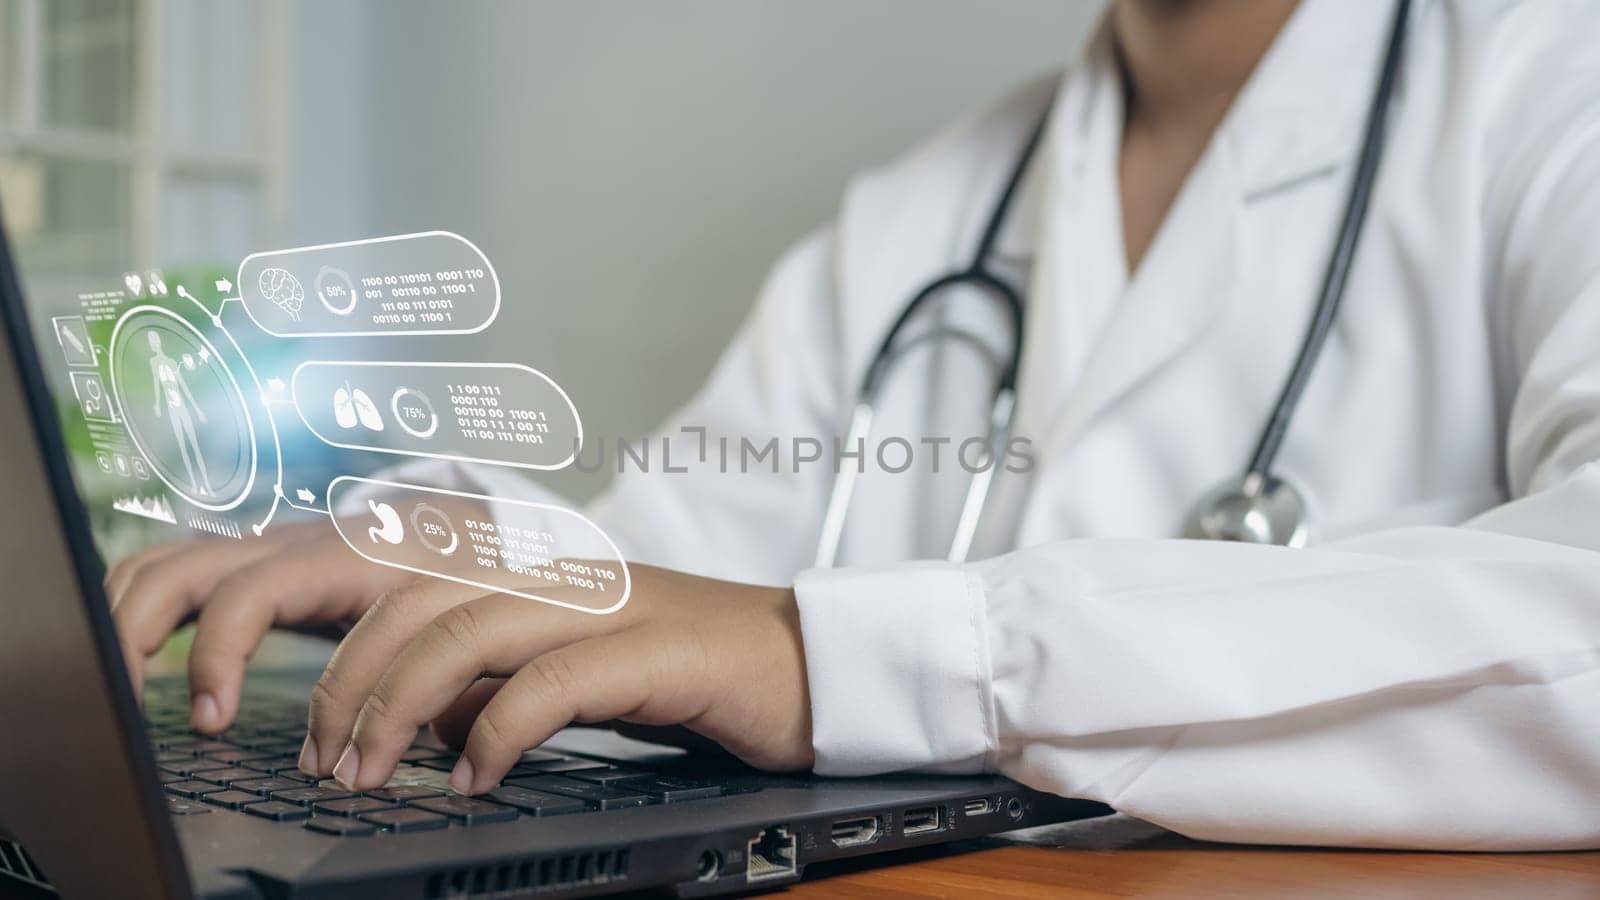 Doctors use  computers to research medical information. medical concept by Unimages2527